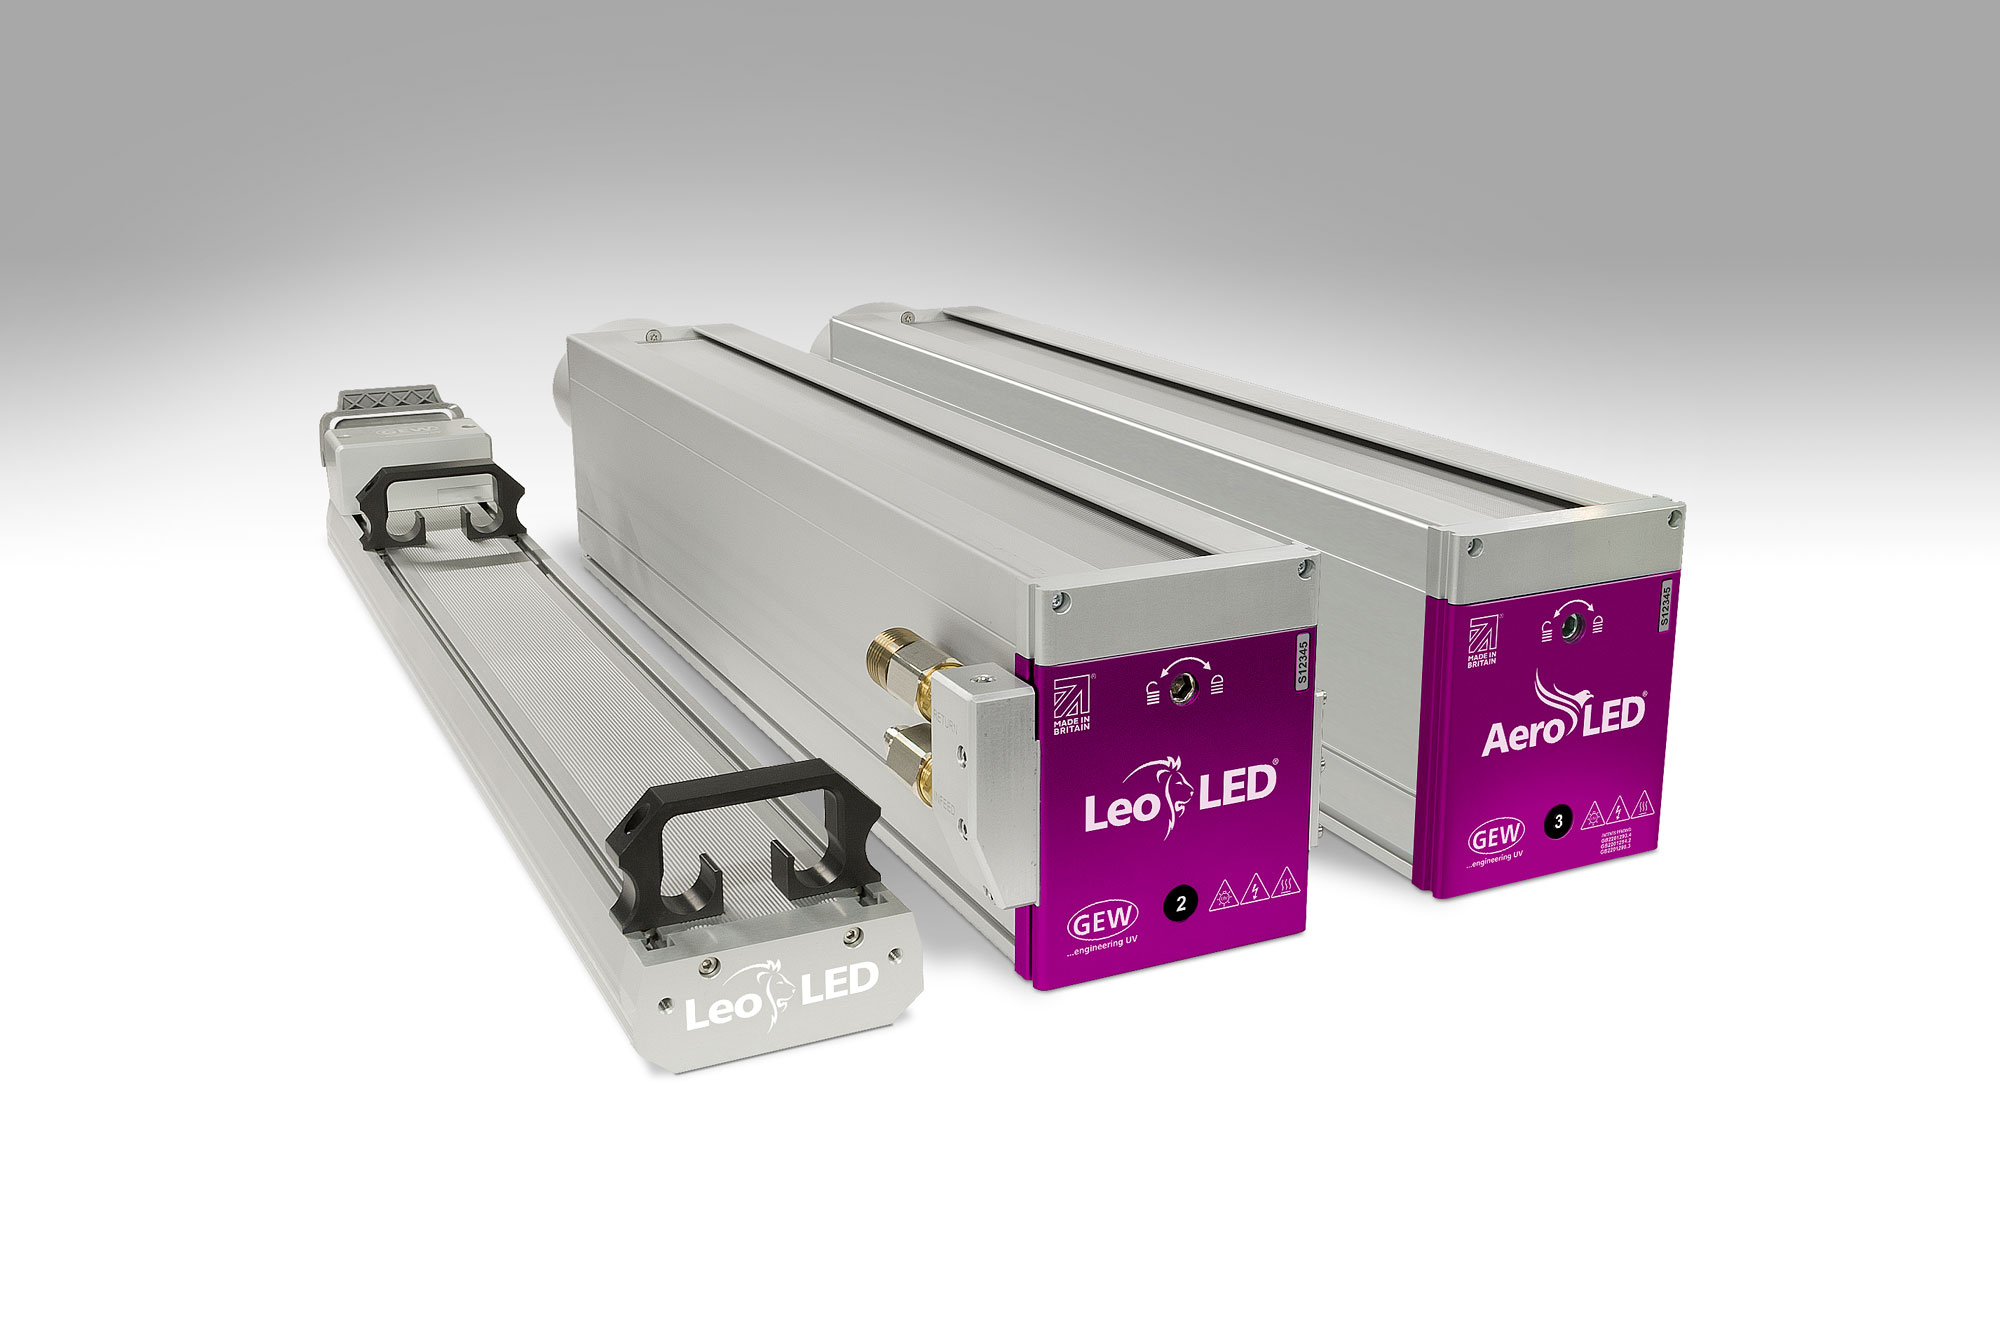 GEW UV curing systems for printing, coating and converting applications